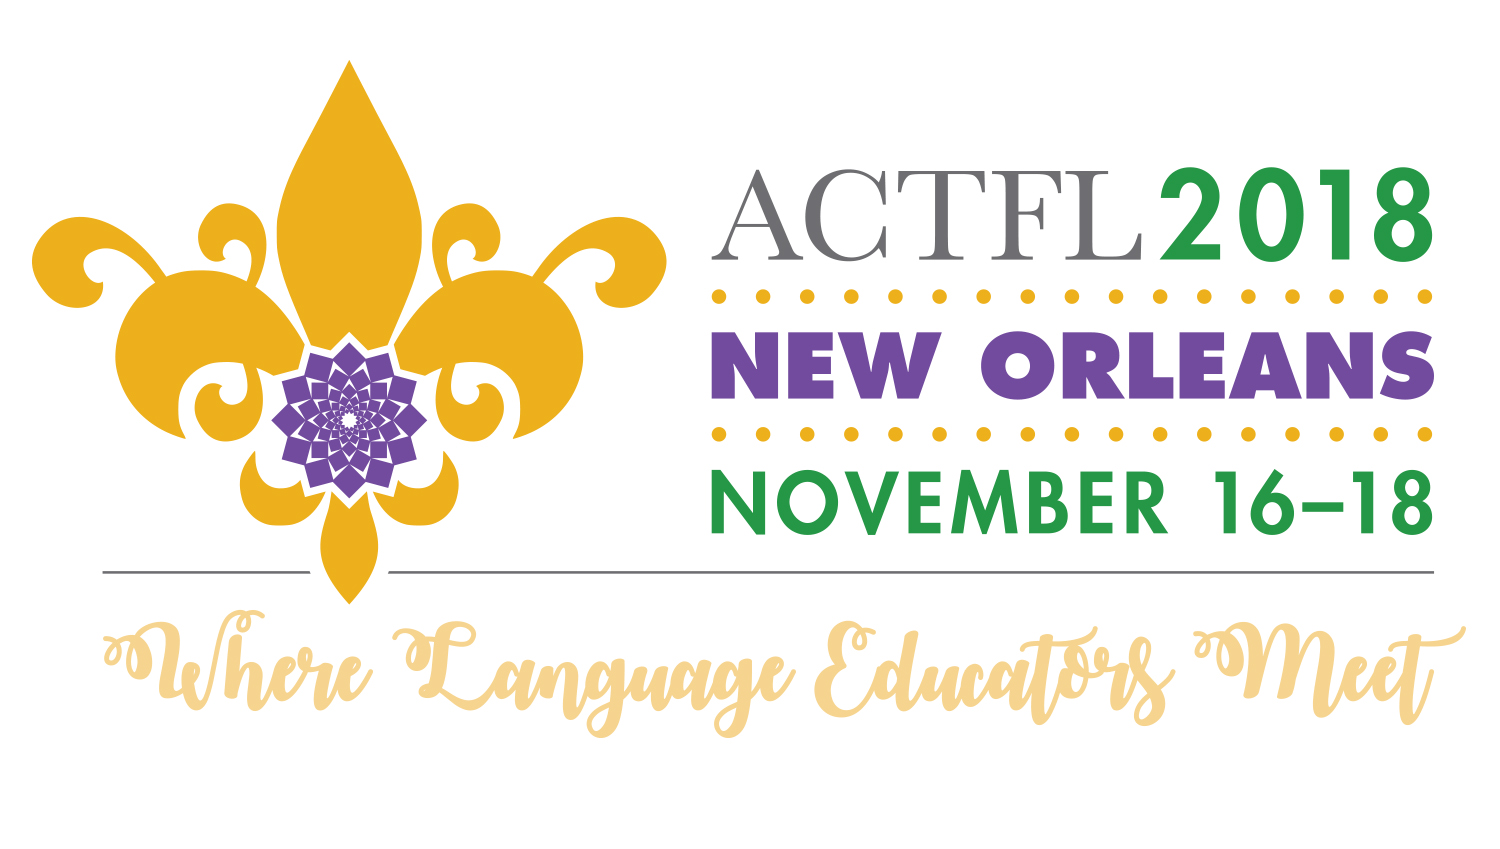 2018 ANNUAL CONVENTION AND WORLD LANGUAGES EXPO